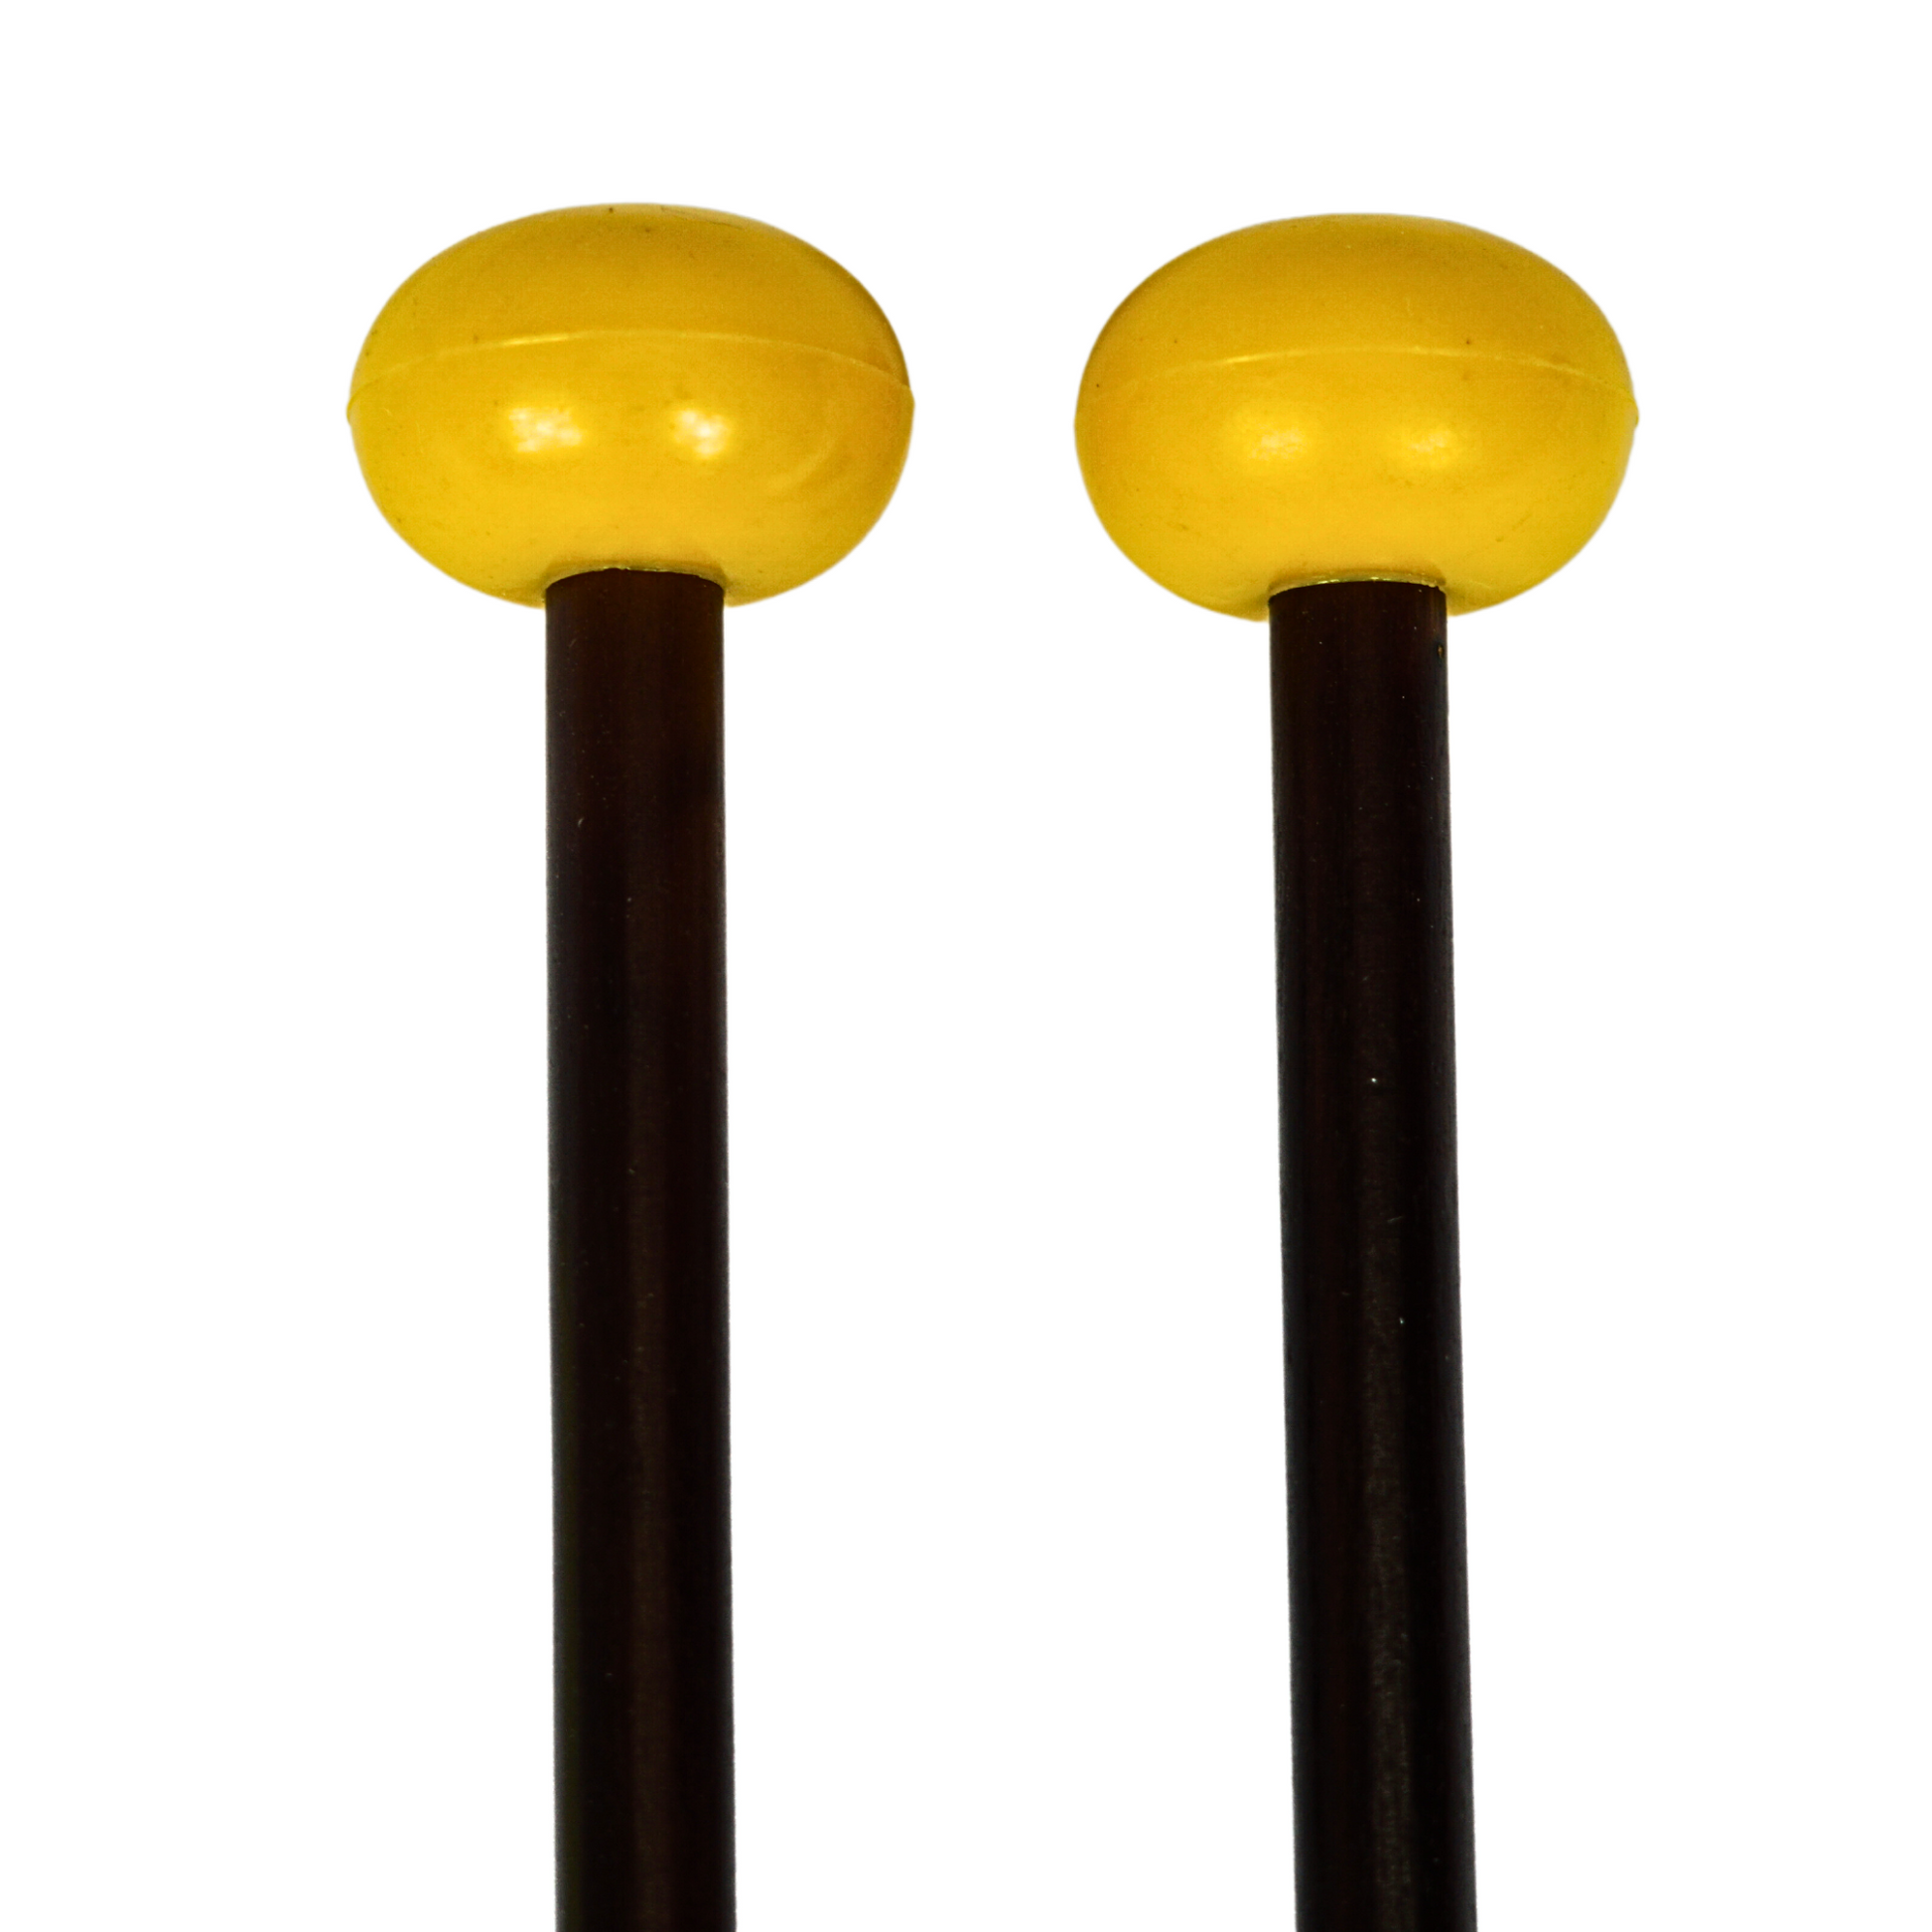 Xylophone/Bell Mallets, Extra-Hard, Yellow pair - MAL-XM4-Y